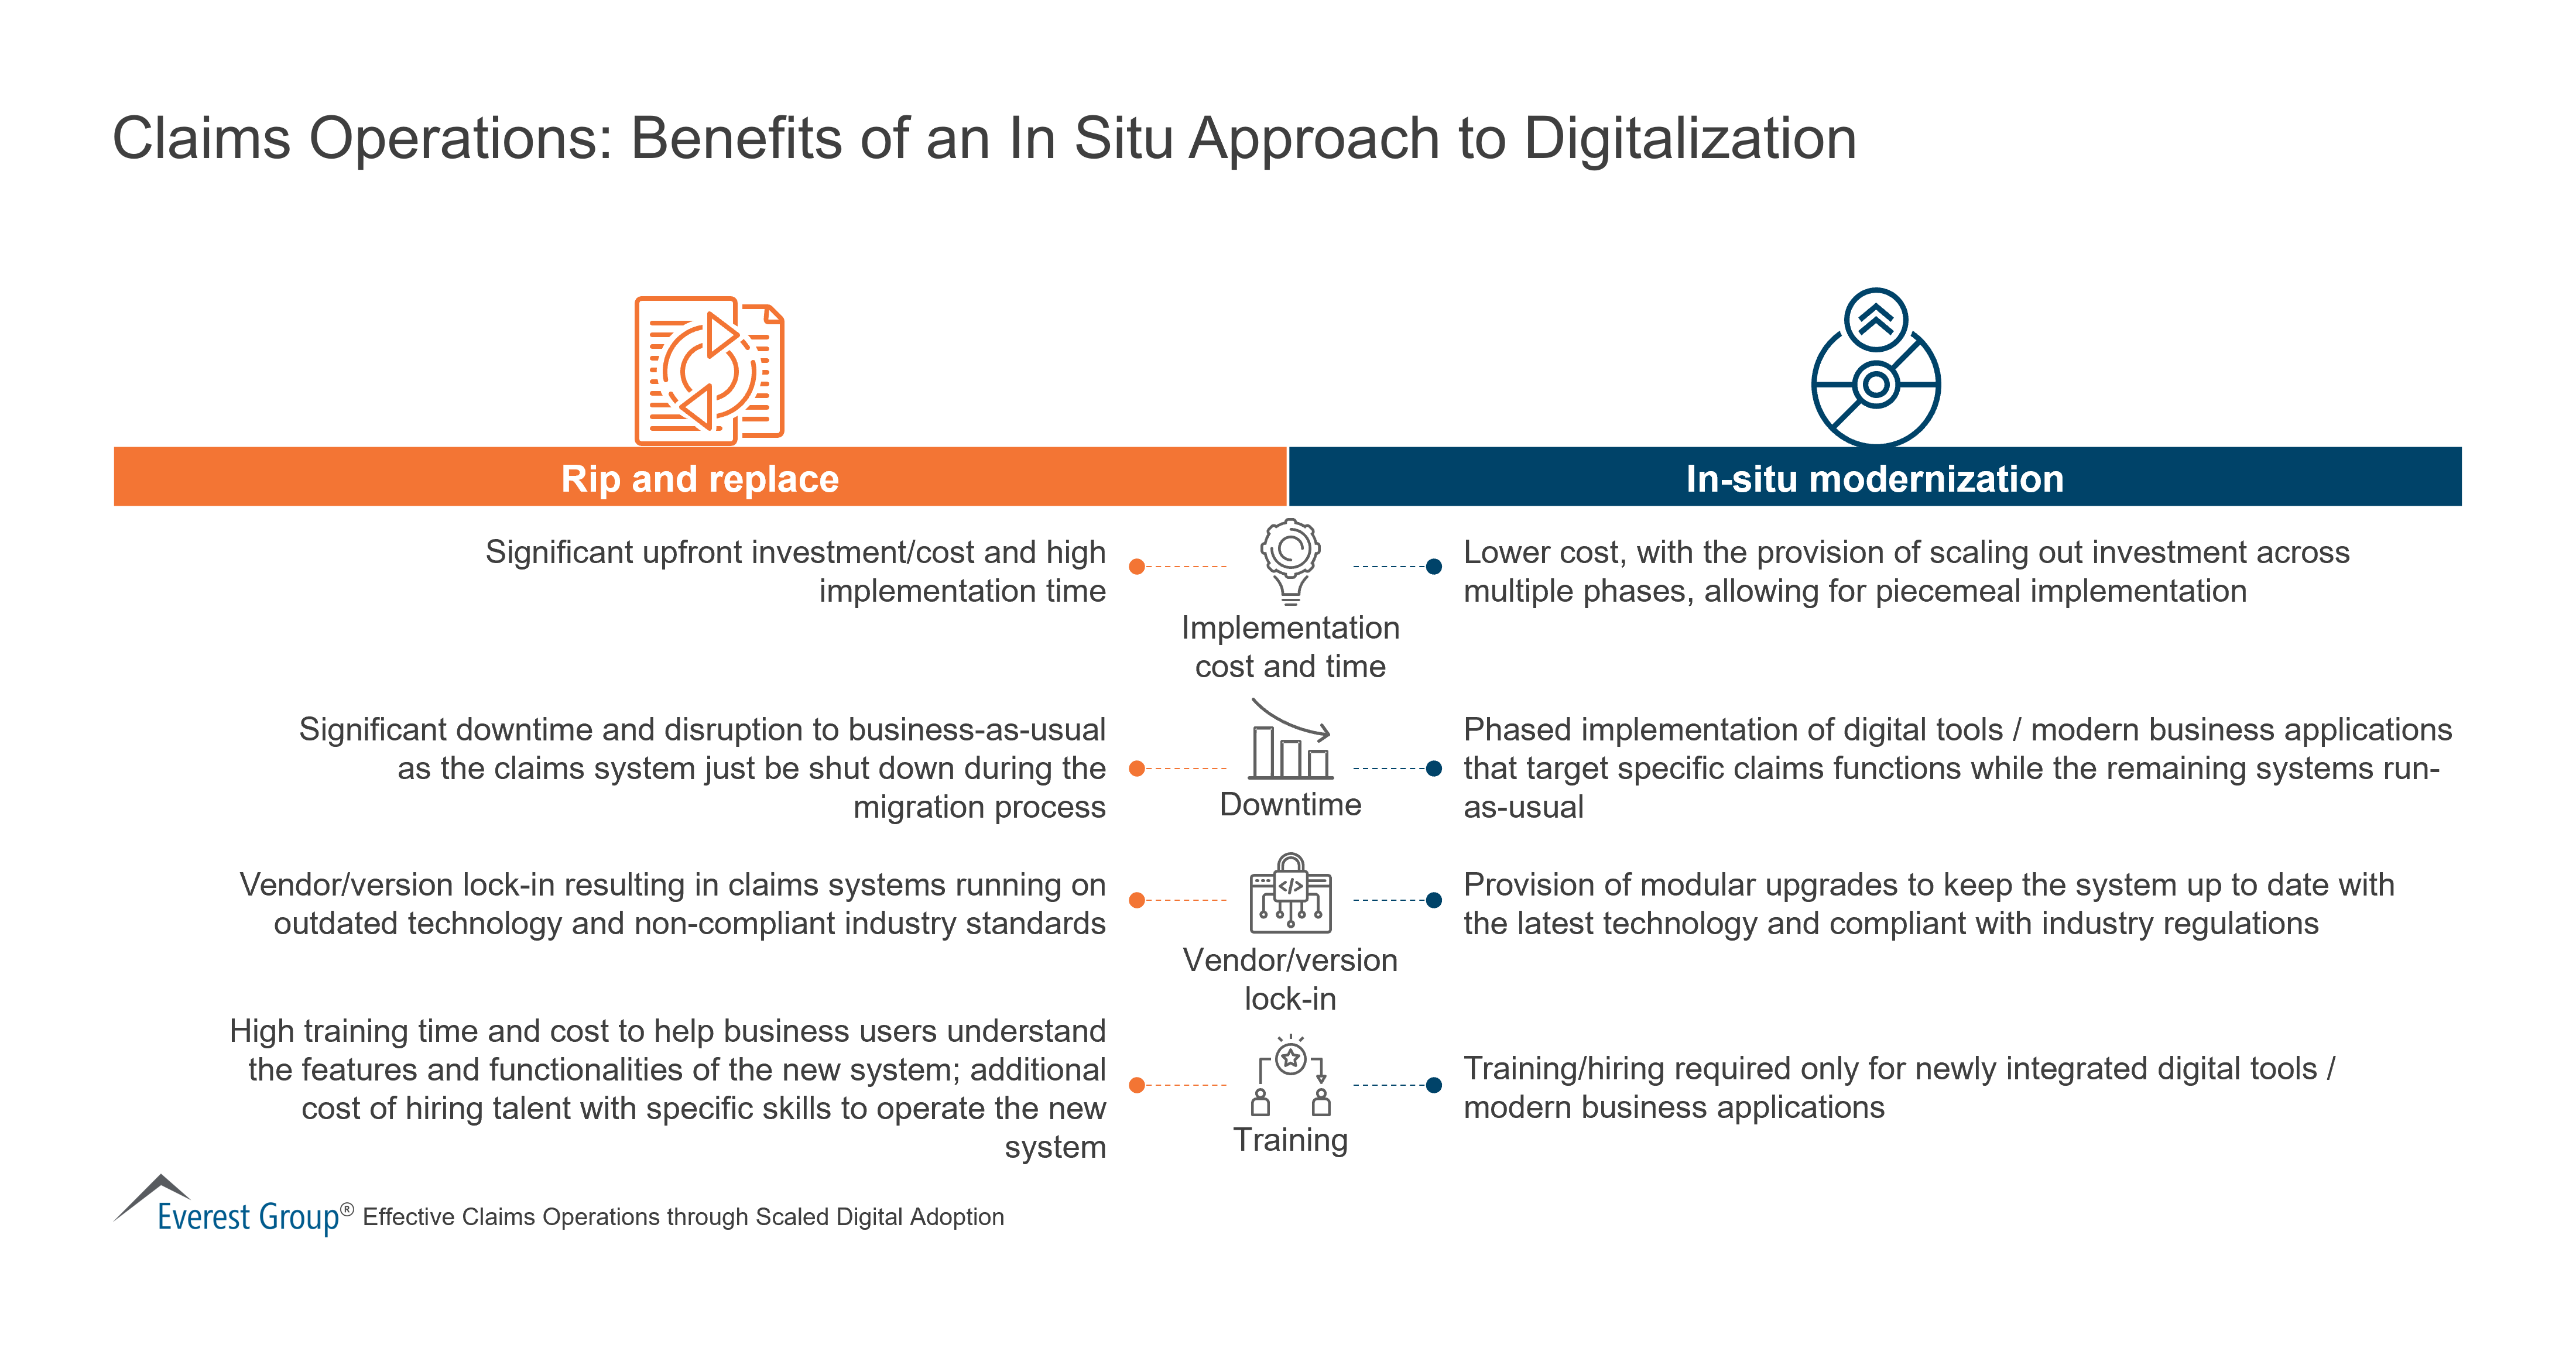 Claims Operations - Benefits of an In Situ Approach to Digitalization